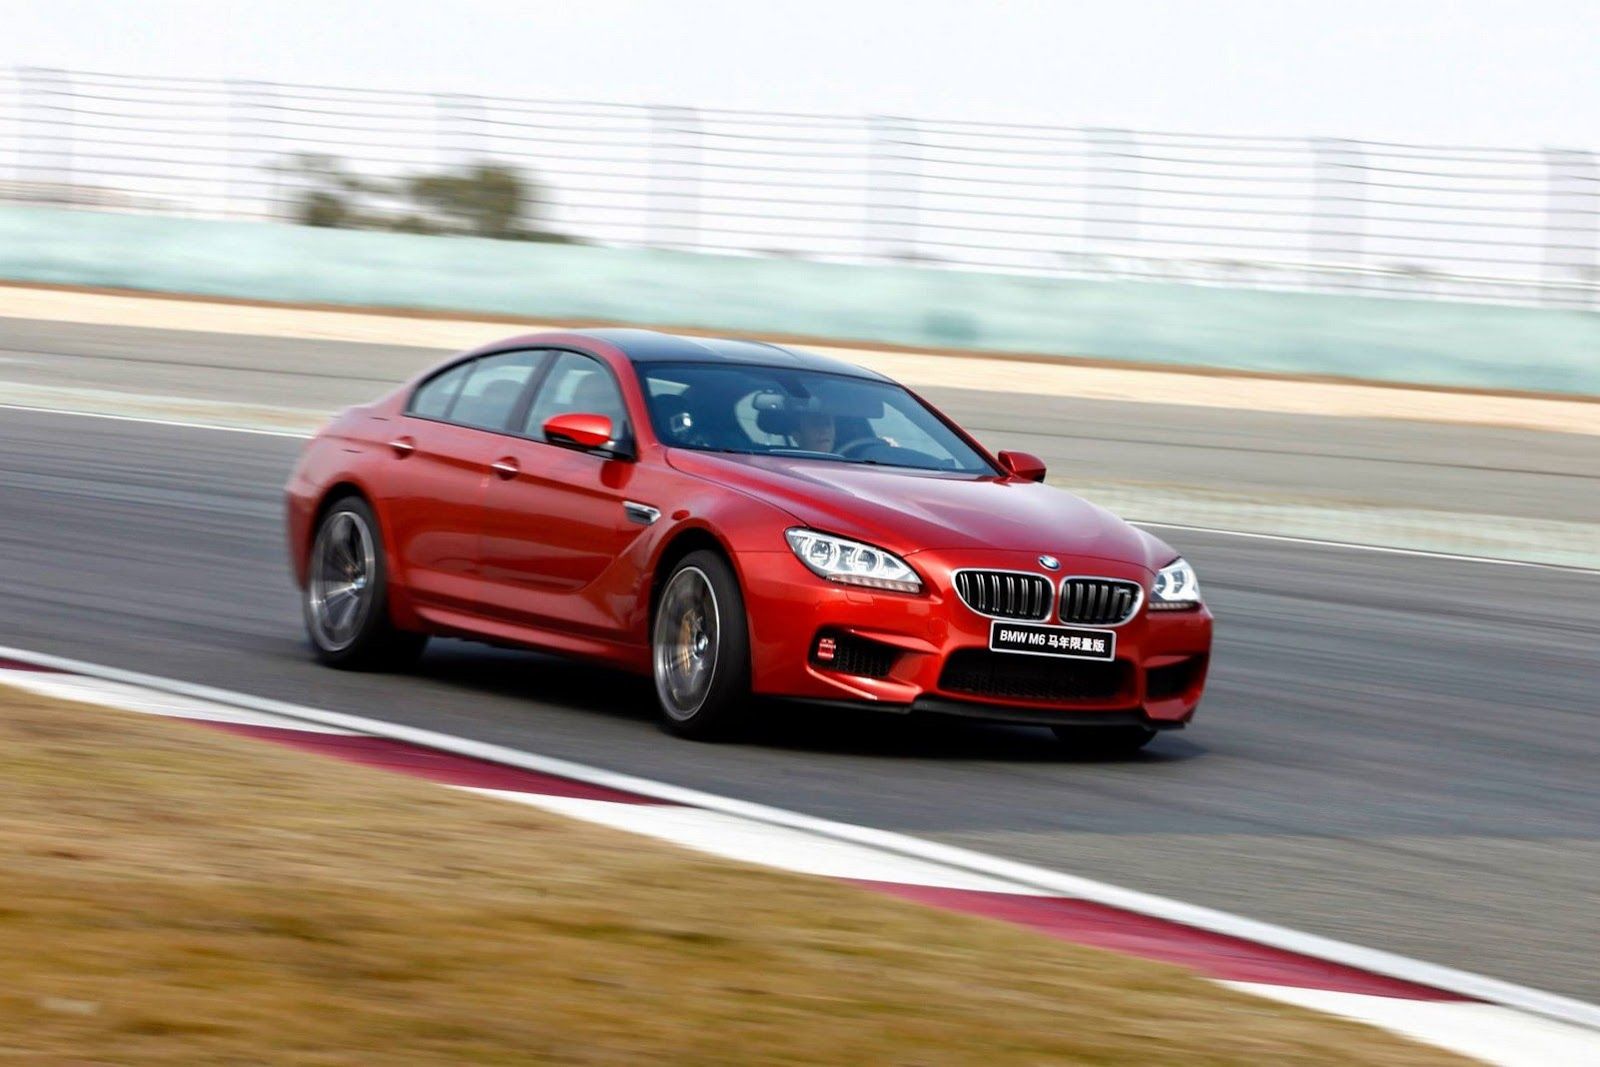 BMW M6 on a racetrack 